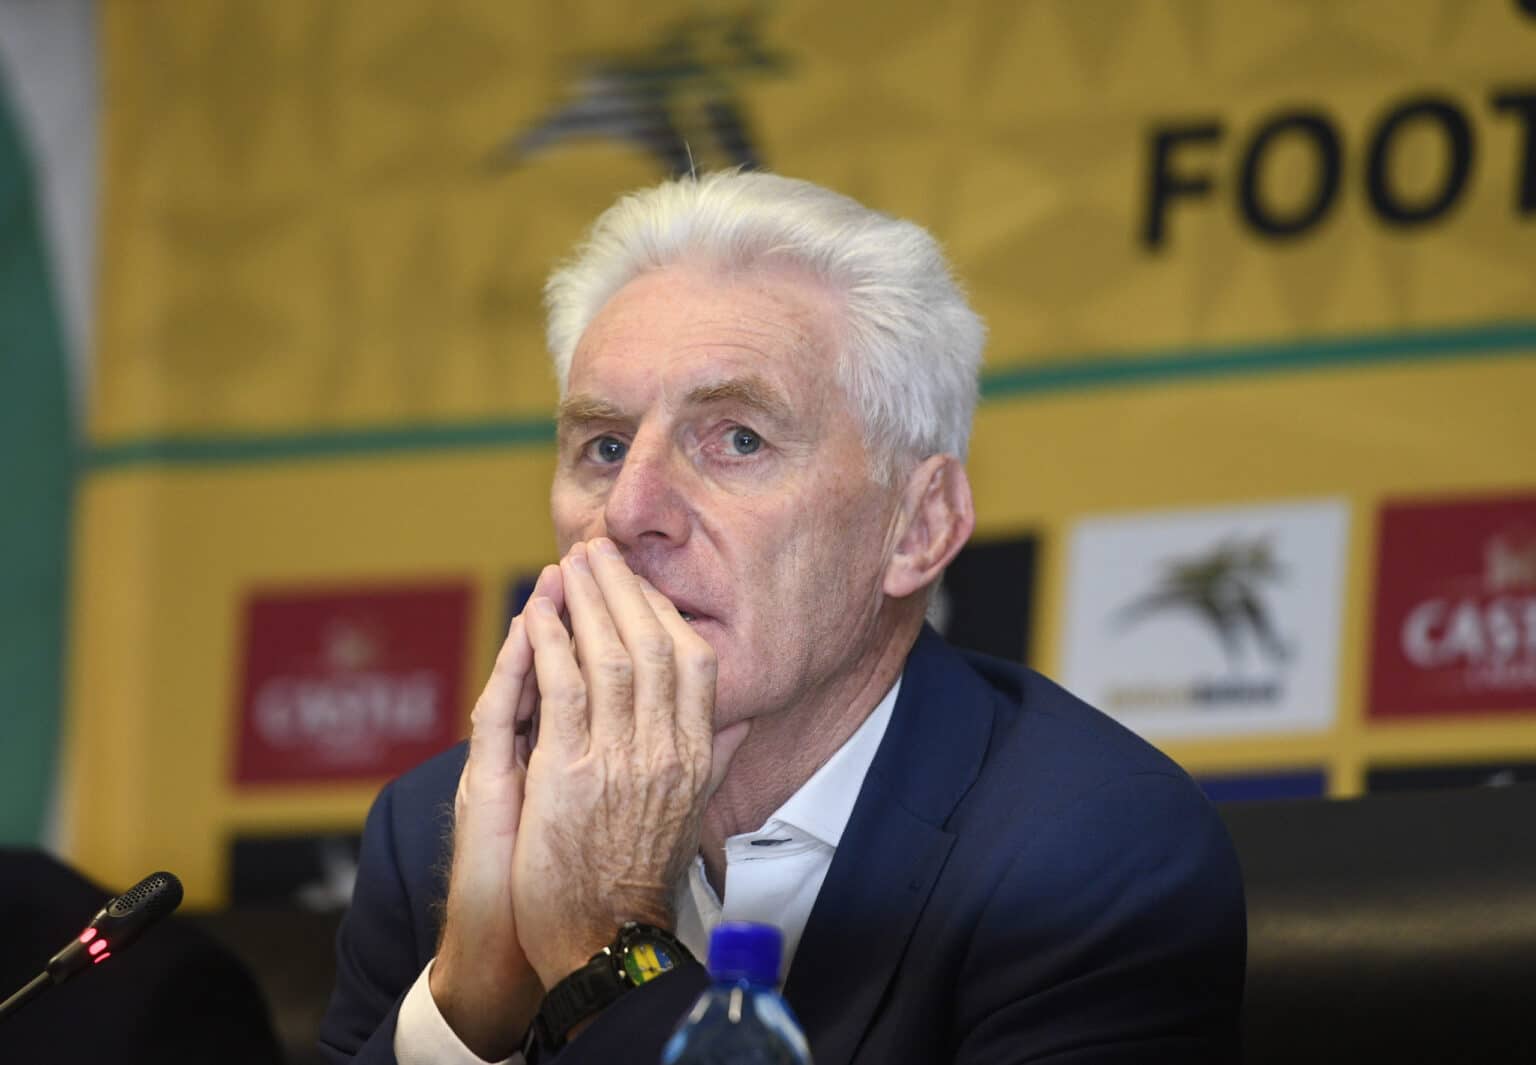 2022 WC qualifiers: South Africa coach Hugo Broos names strong starting eleven to face Ghana